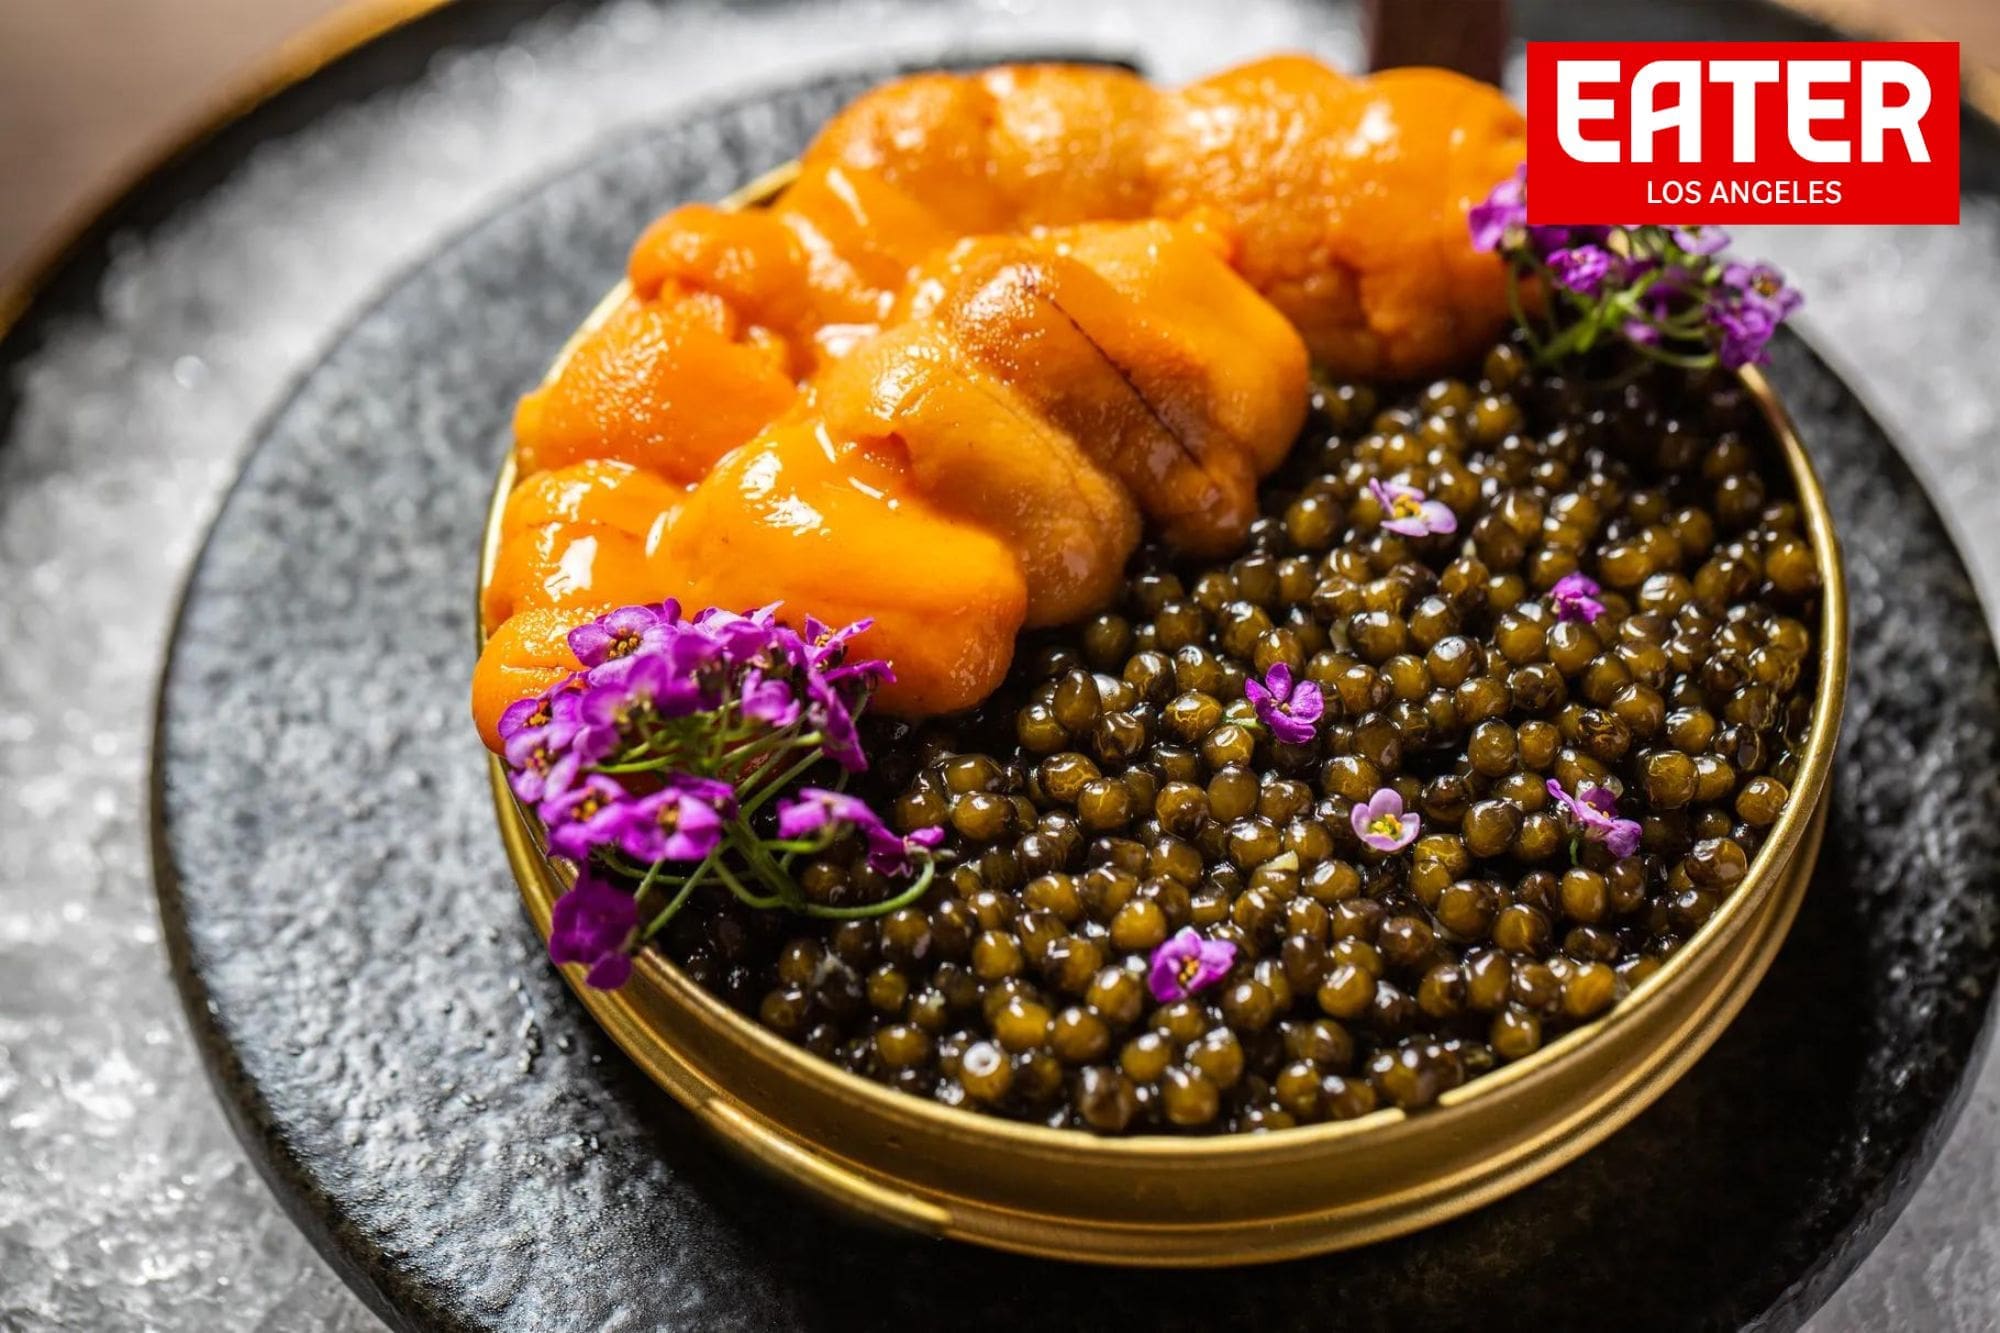 These Two LA Hot Spots Just Got Added to the California Michelin Guide